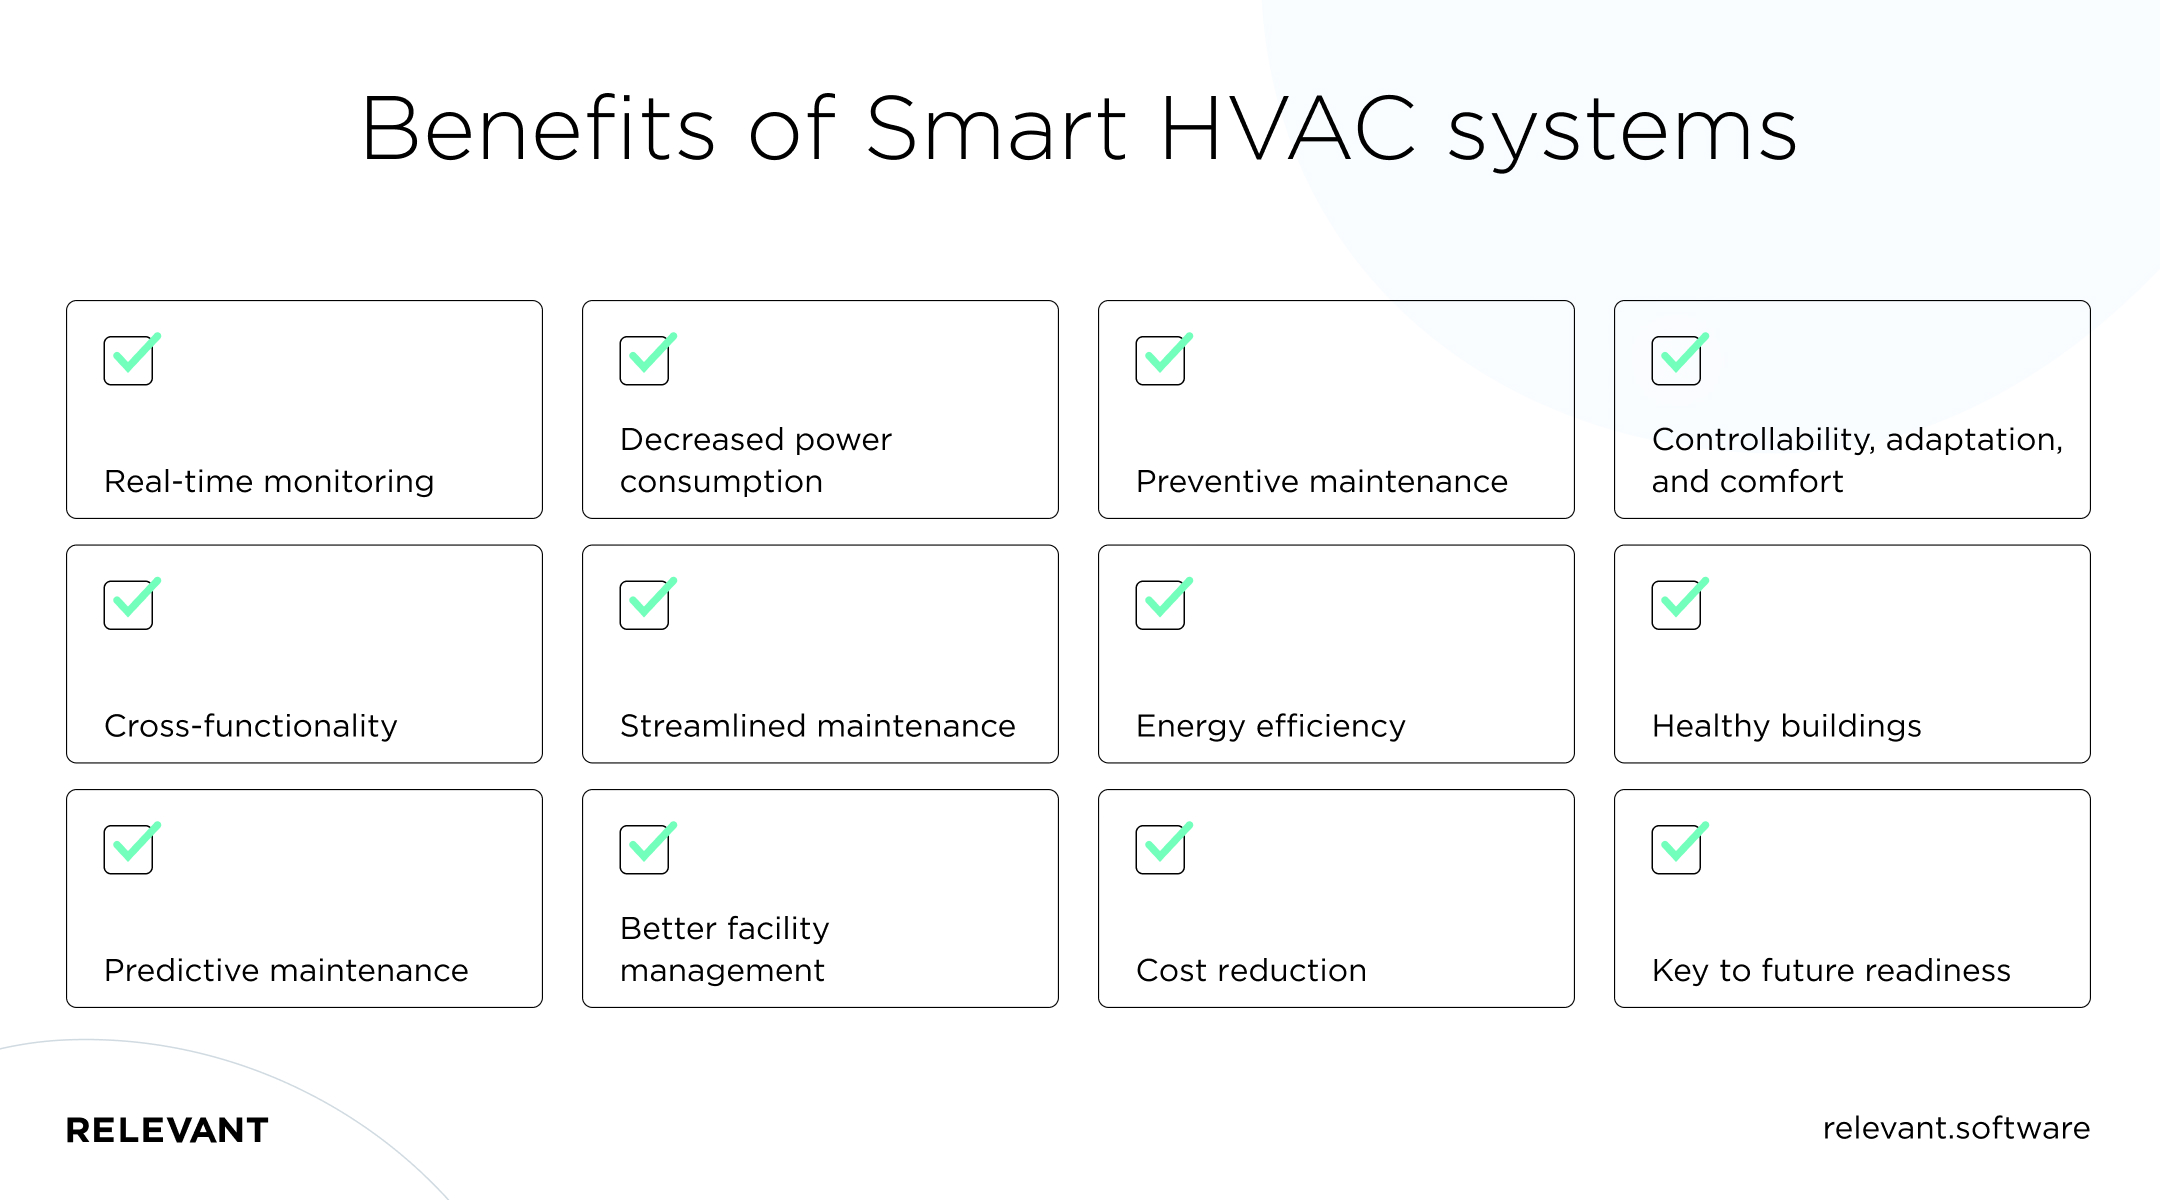 Benefits of Smart HVAC systems